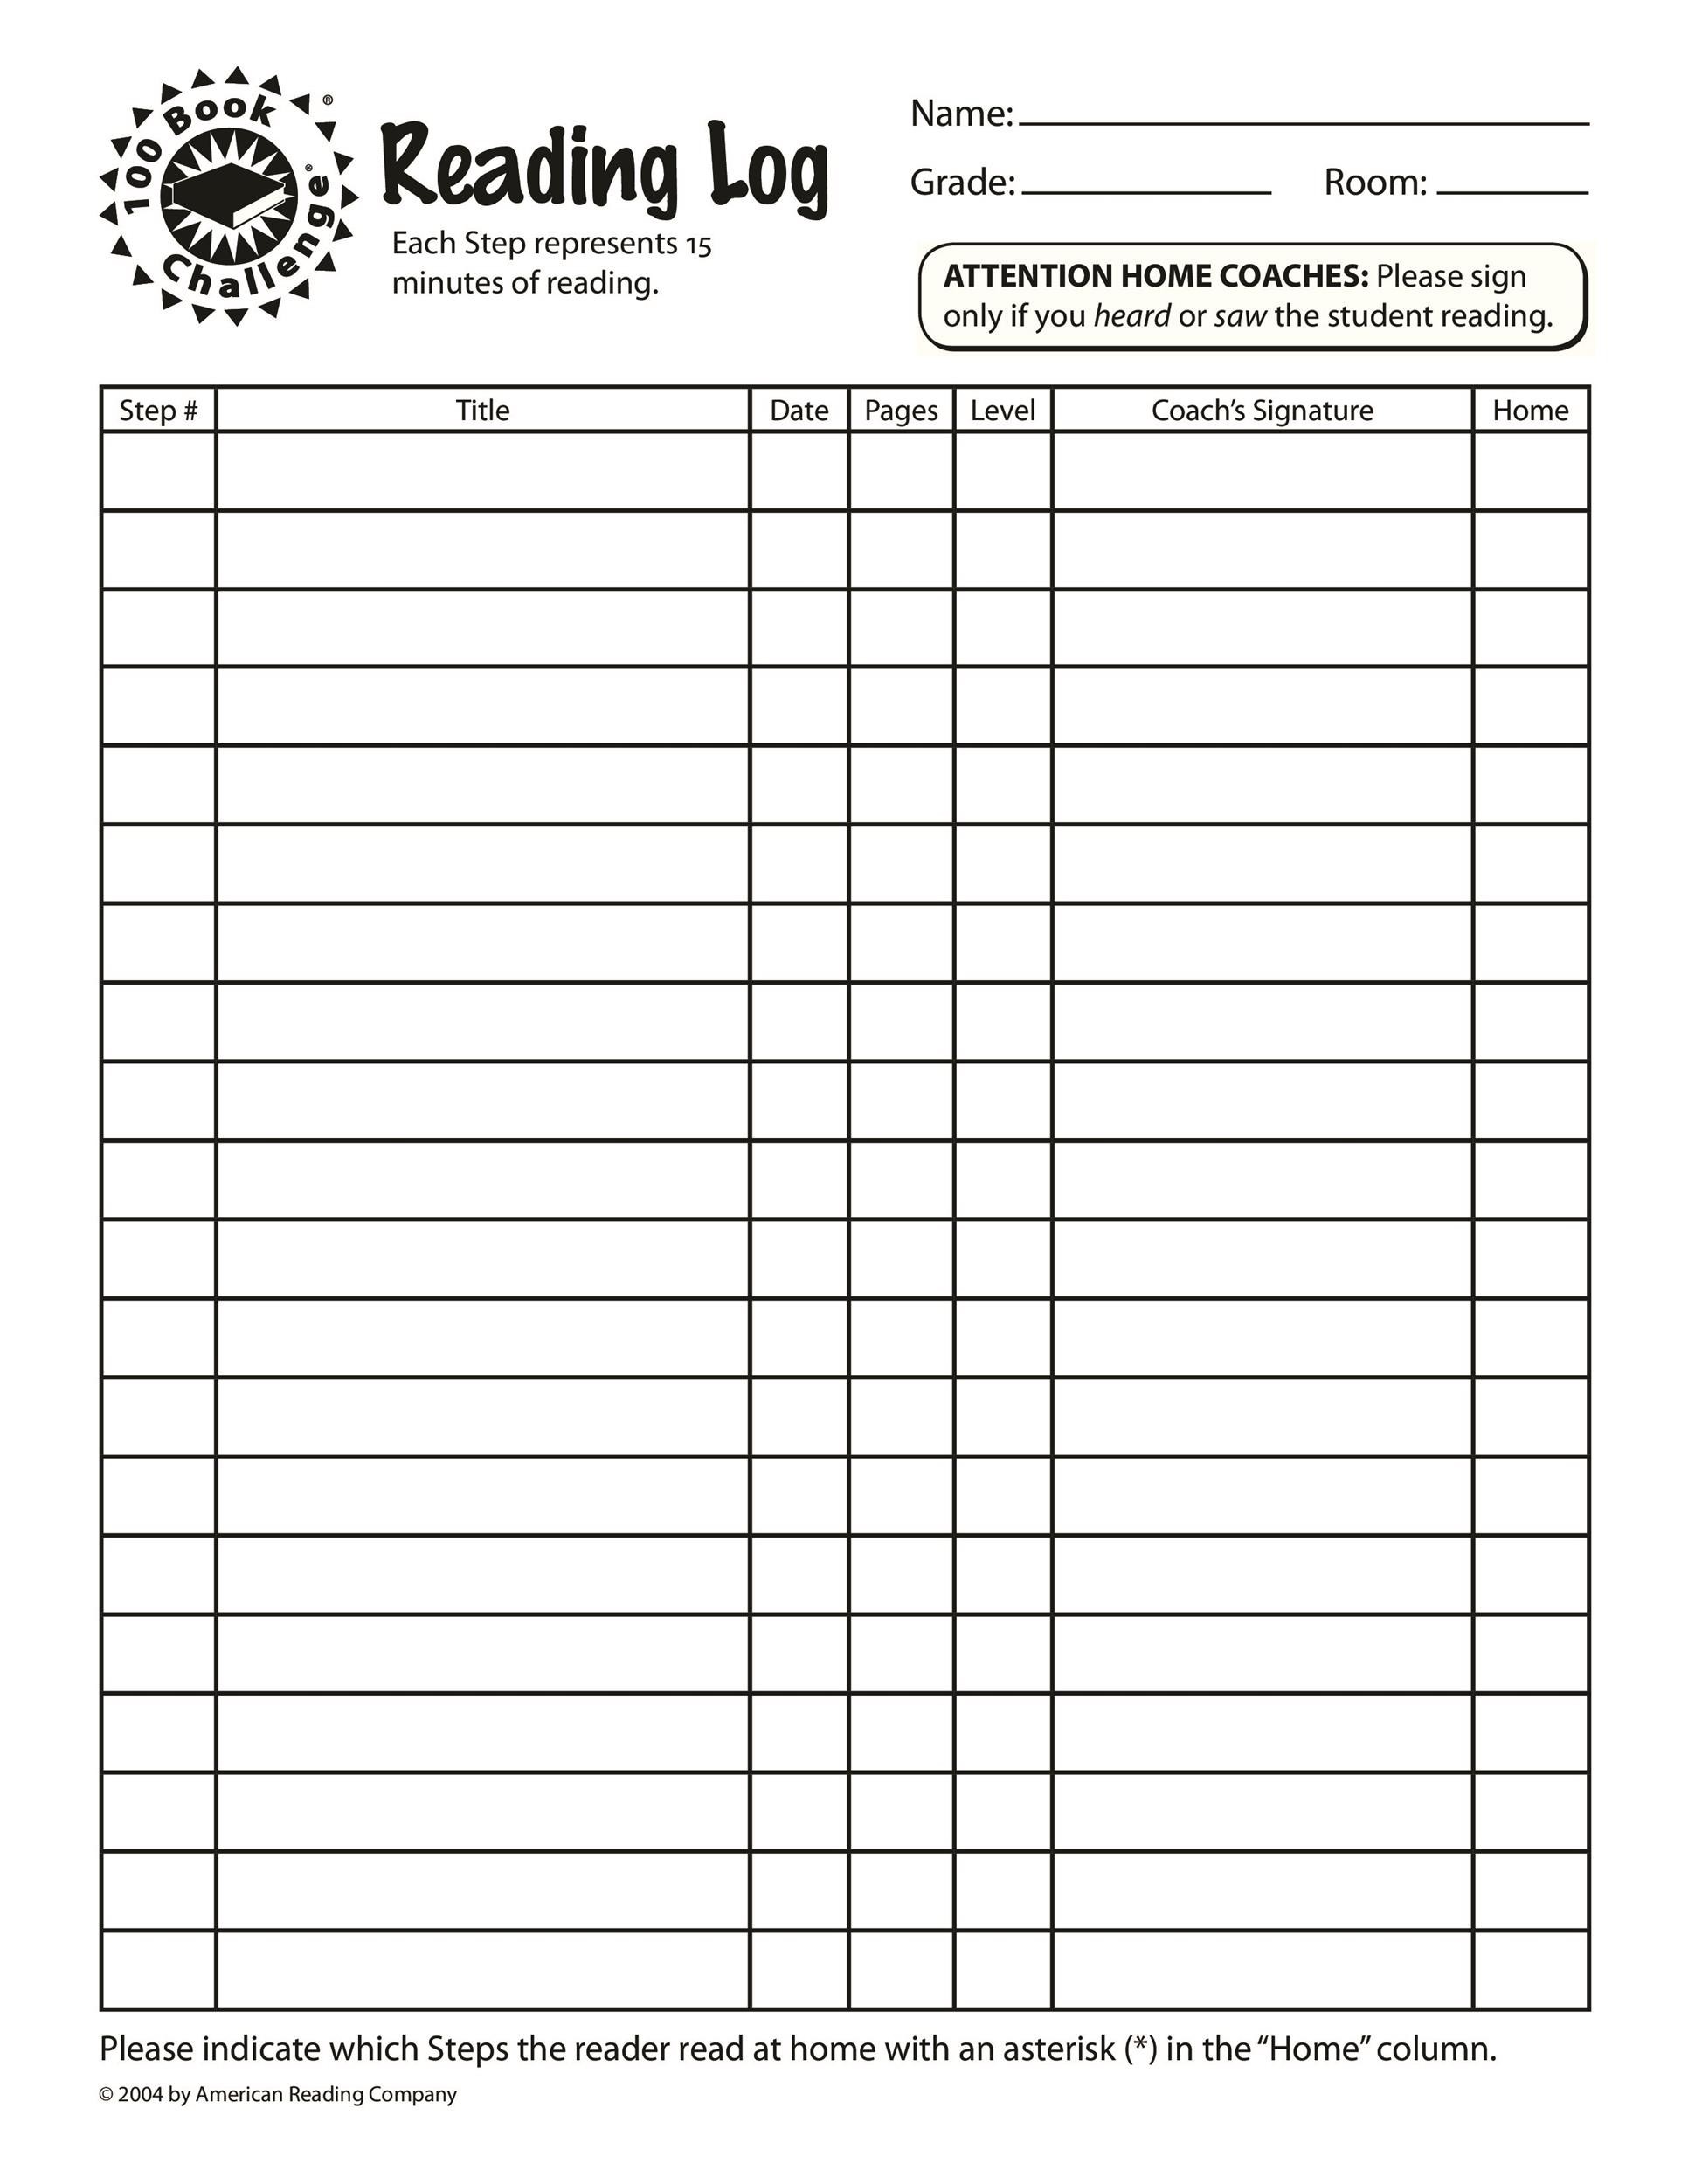 monthly-reading-log-calendar-rubric-genre-code-guide-tpt-book-it